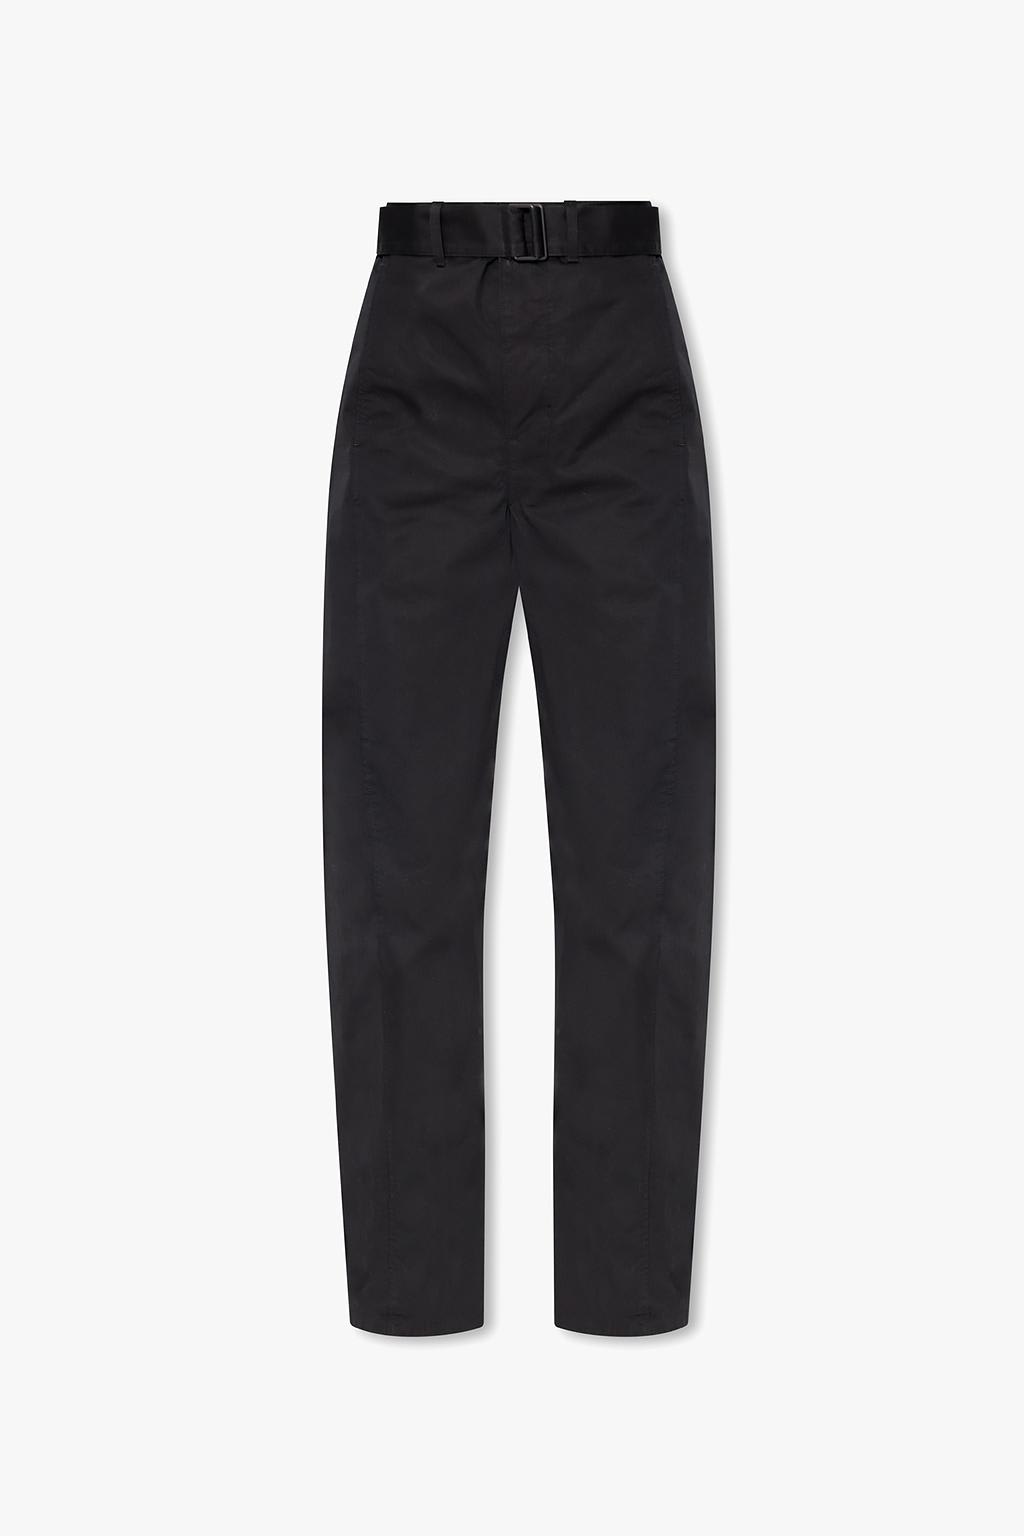 LEMAIRE LOOSE-FITTING TROUSERS